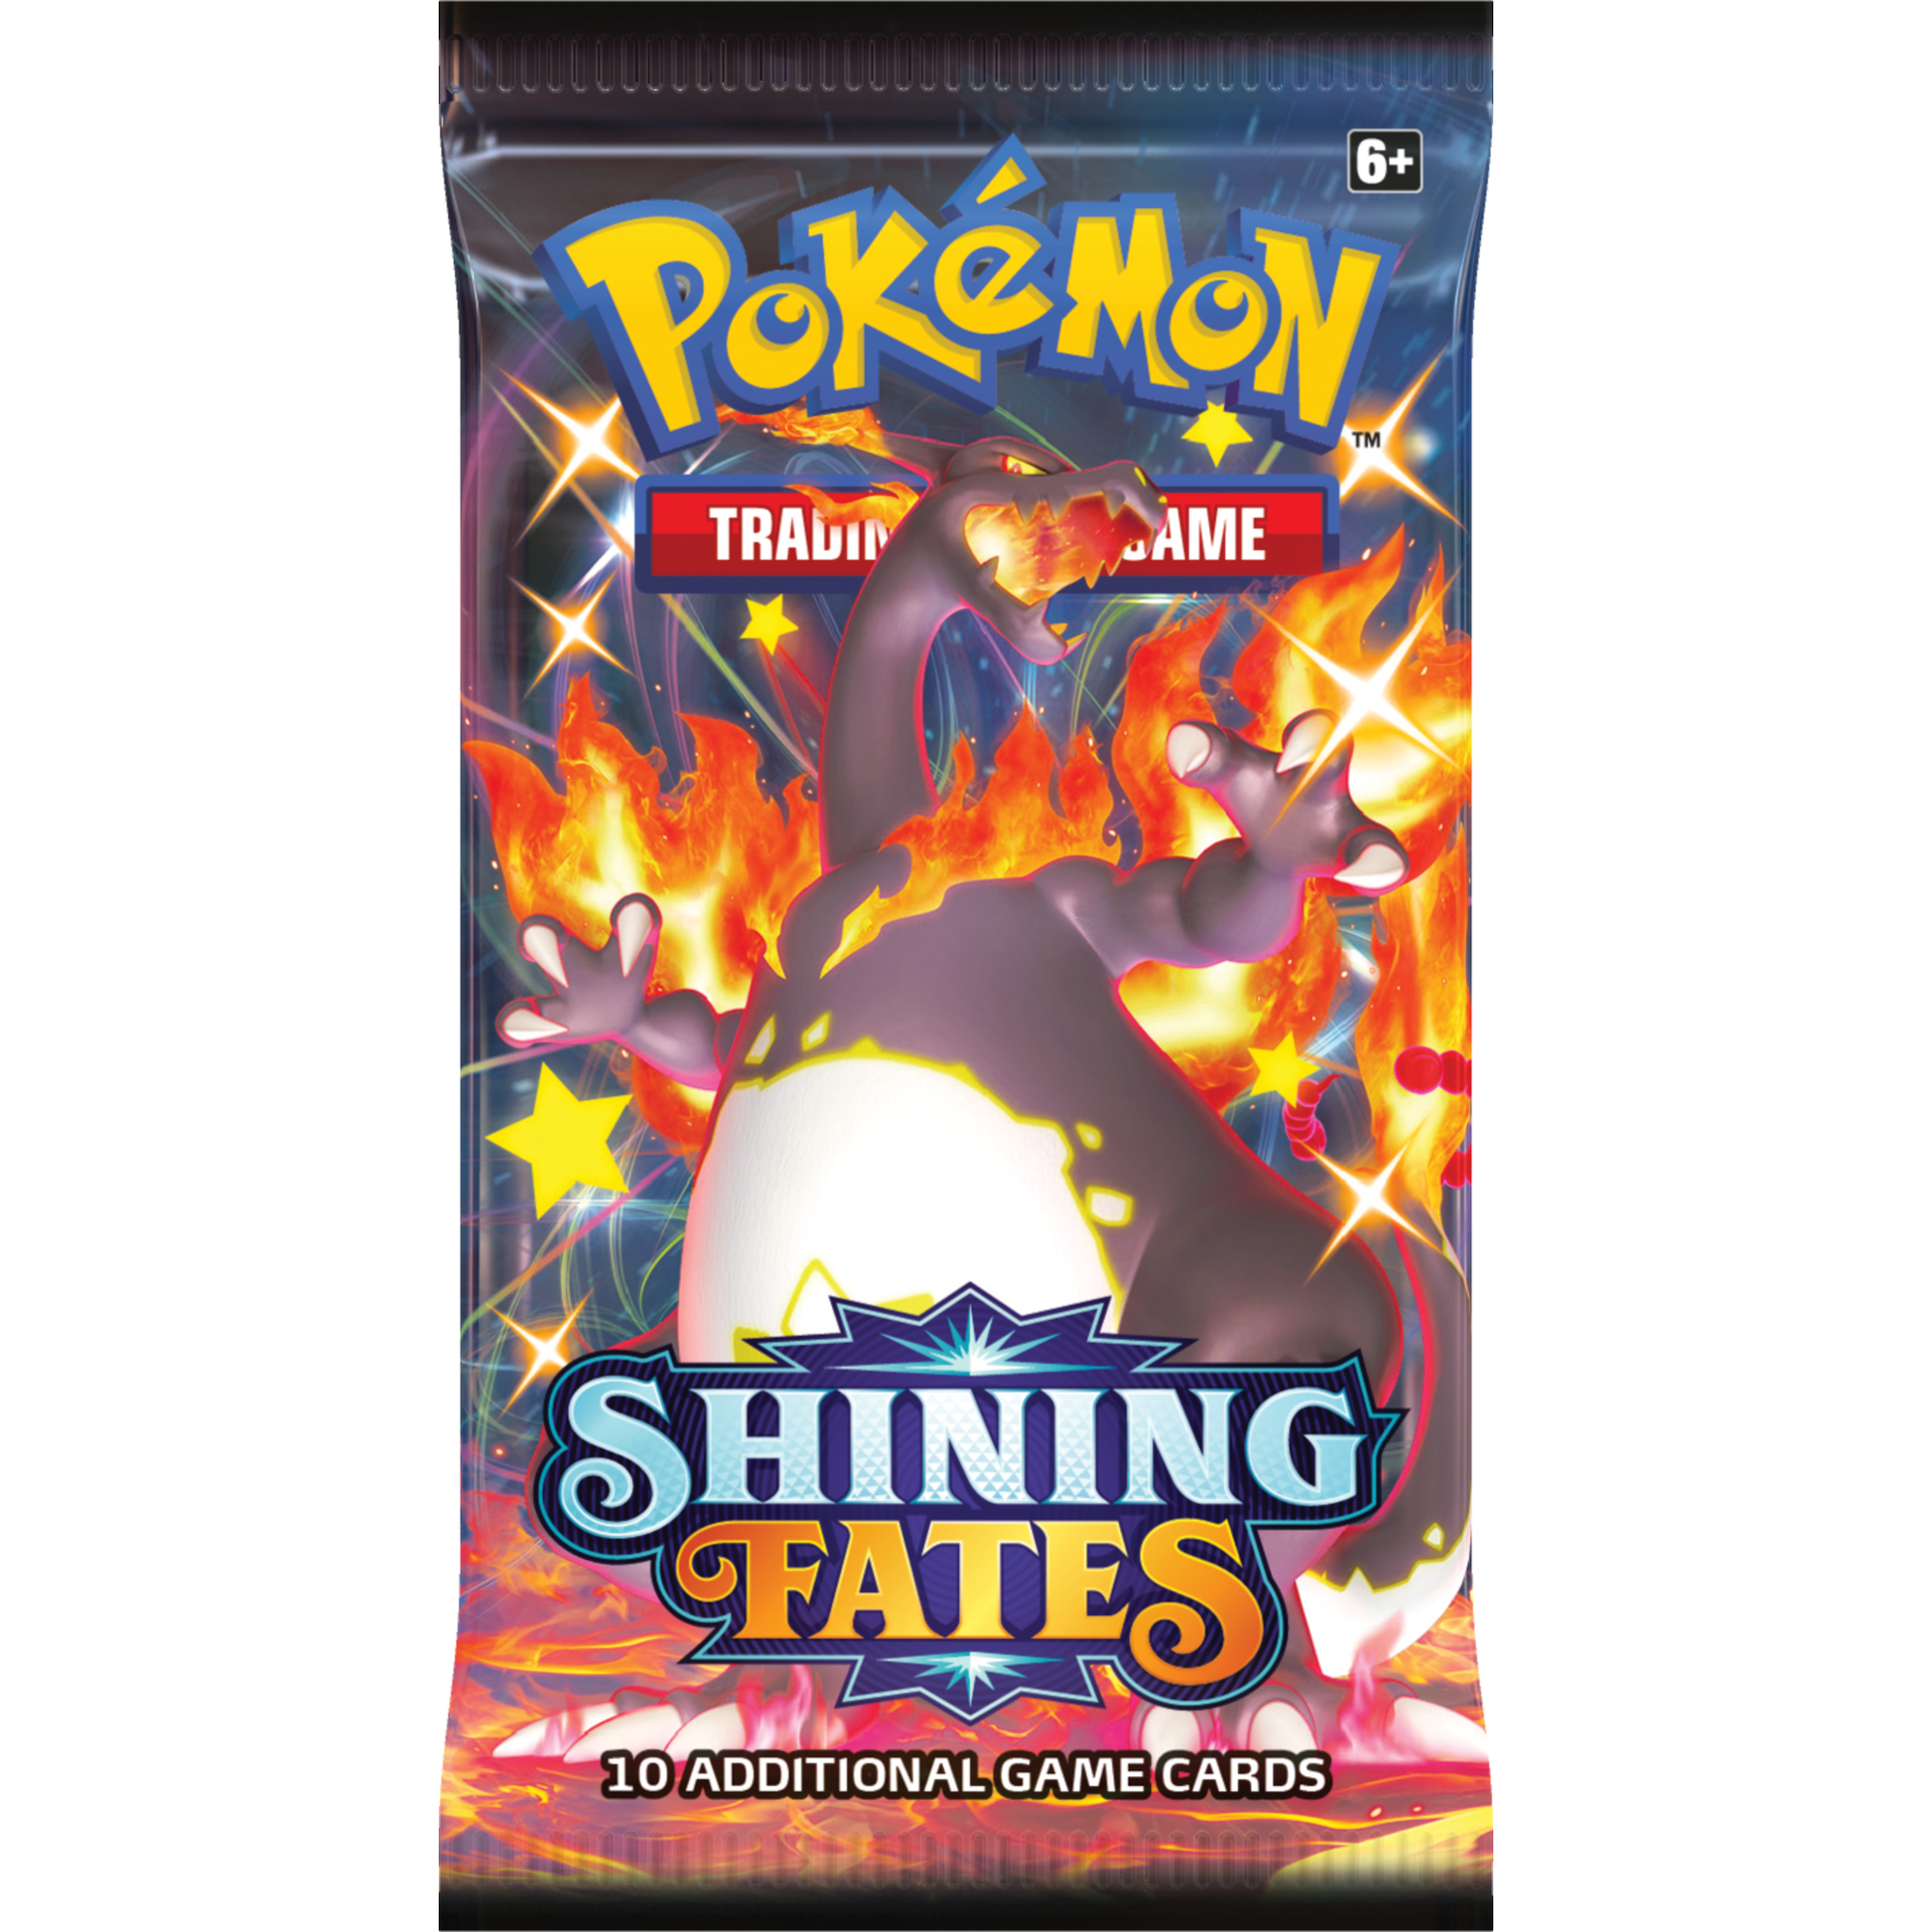  Pokémon Shining Fates Booster Pack  Local Legends Cards & Collectibles